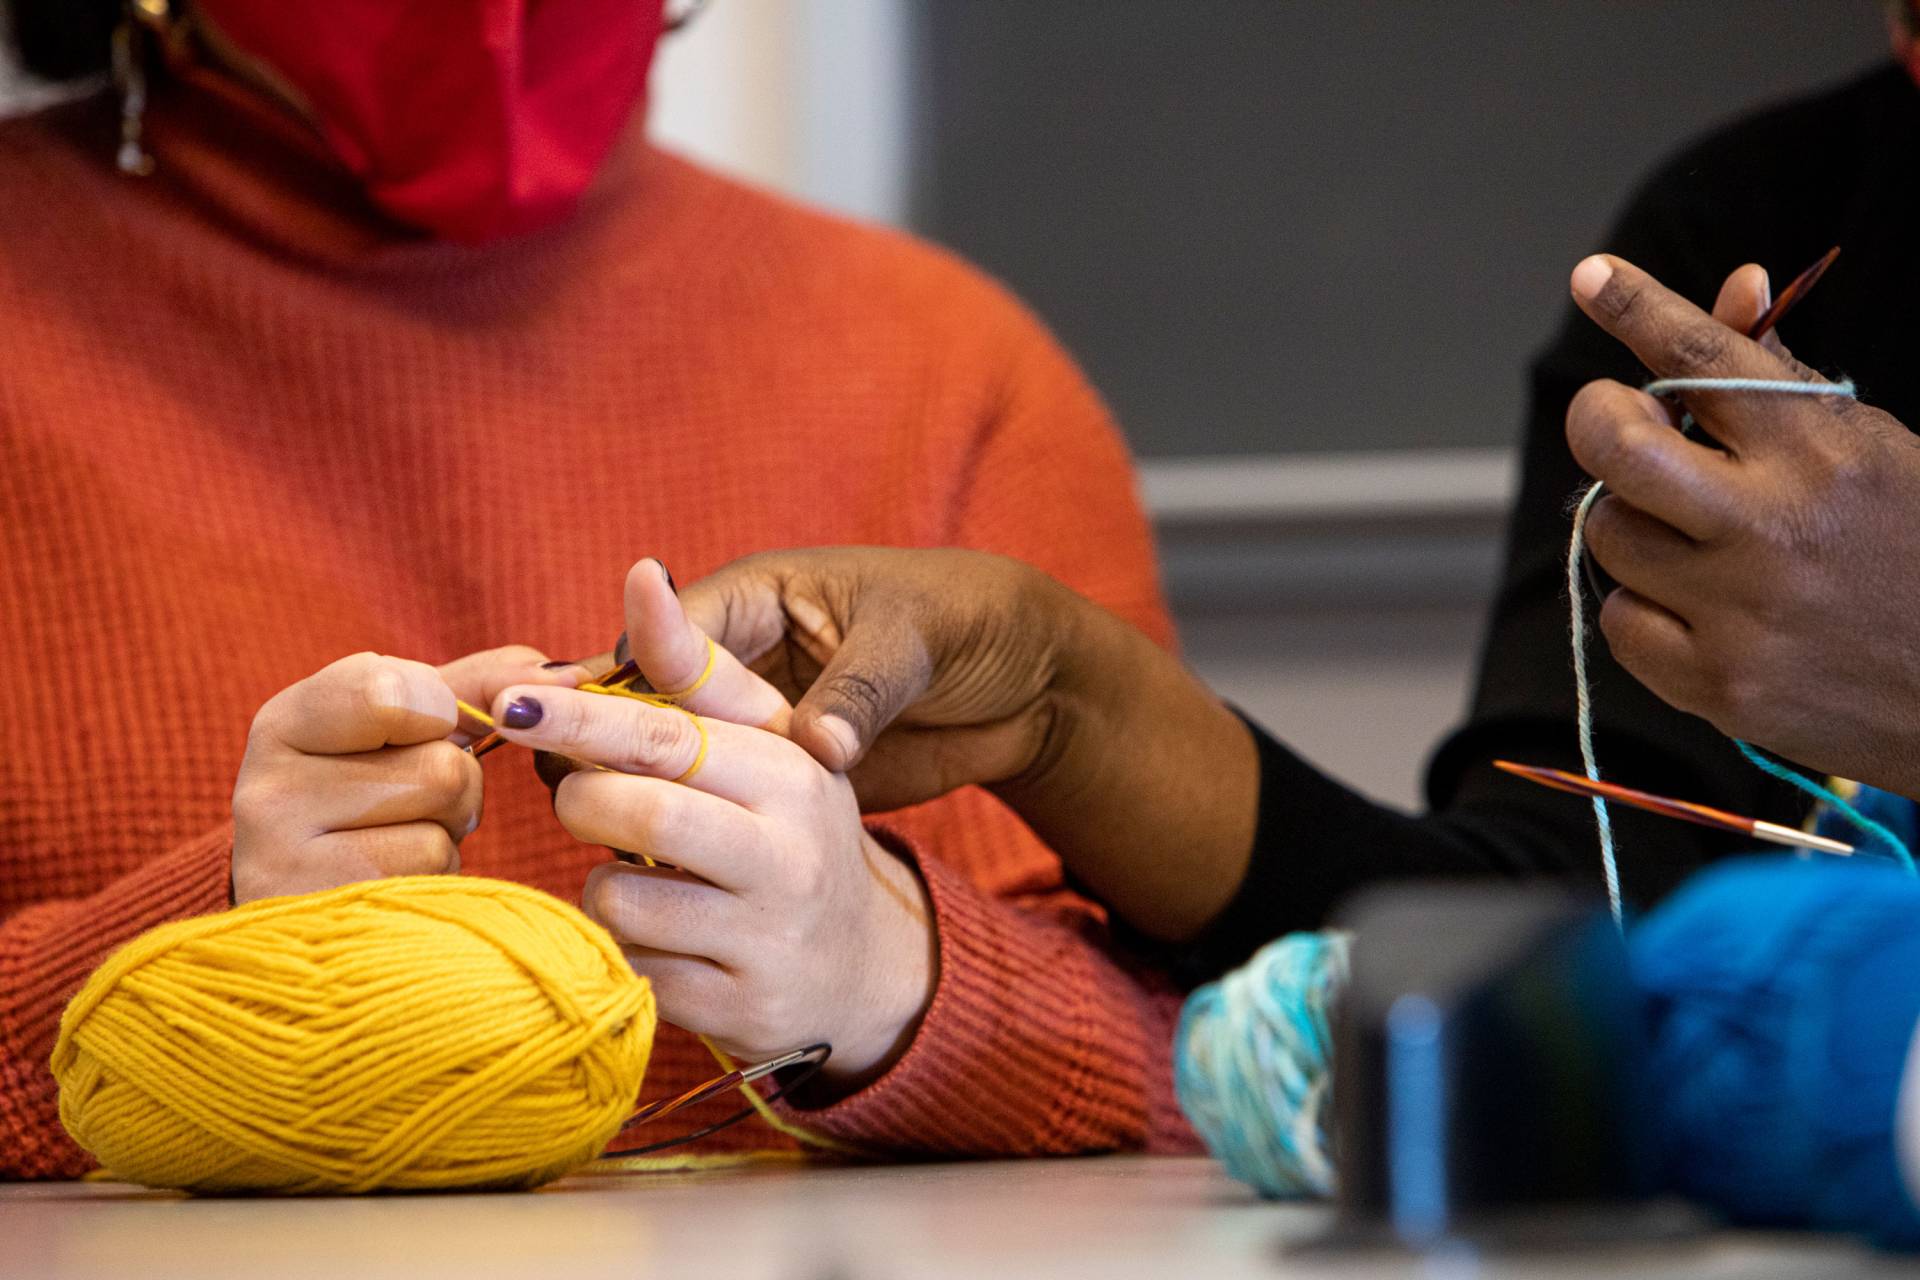 A person knits while another adjusts finger positioning